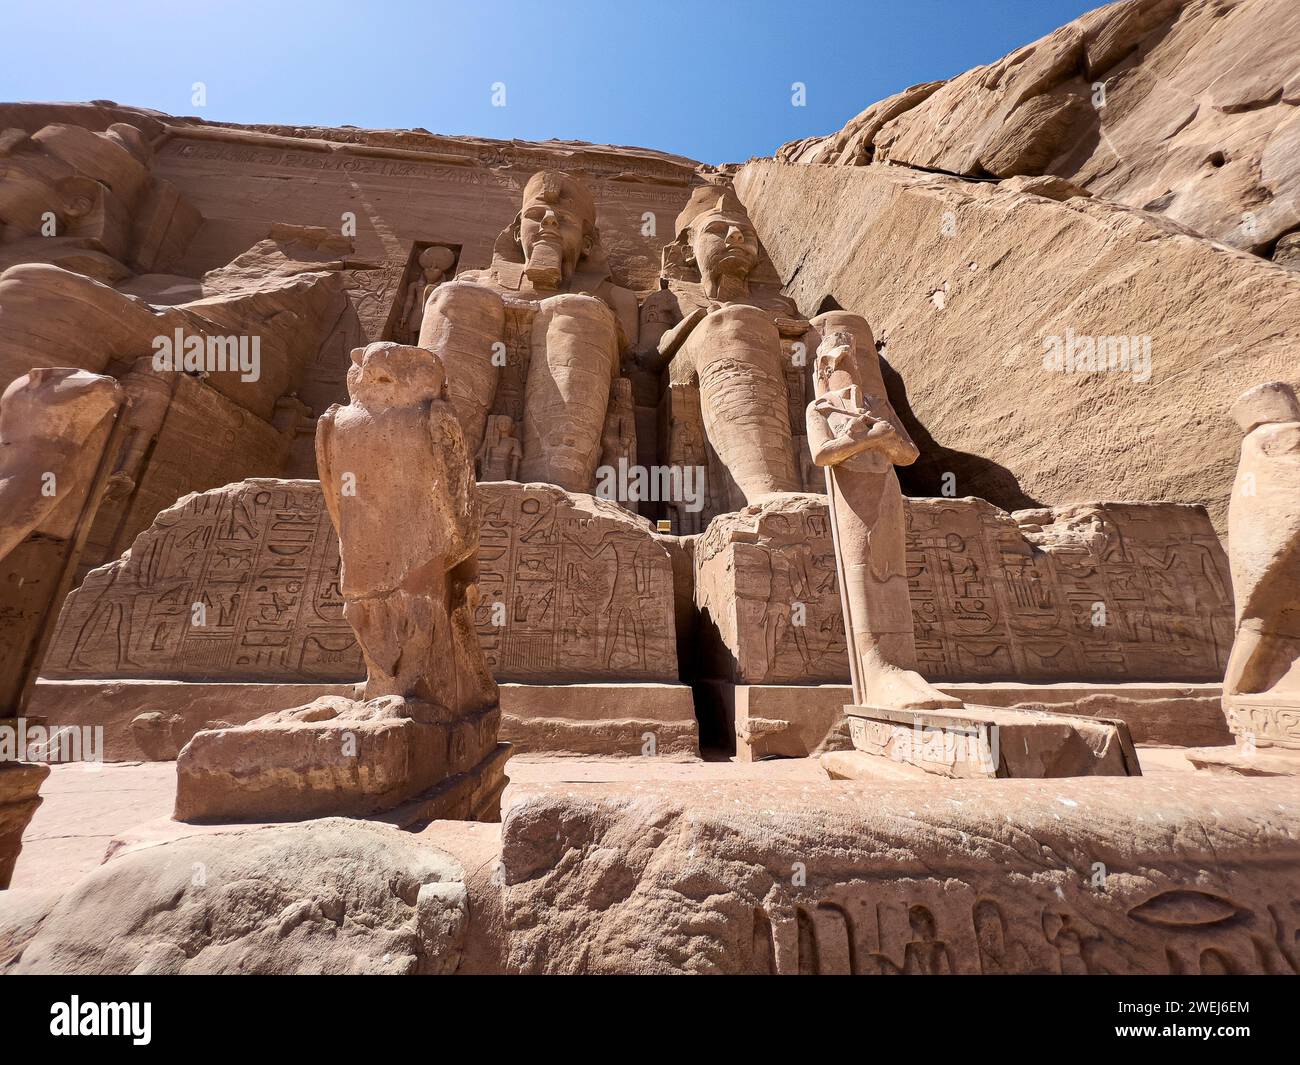 The Great Temple of Abu Simbel with its four iconic 20 meter tall seated colossal statues of Ramses II, Egypt. Stock Photo